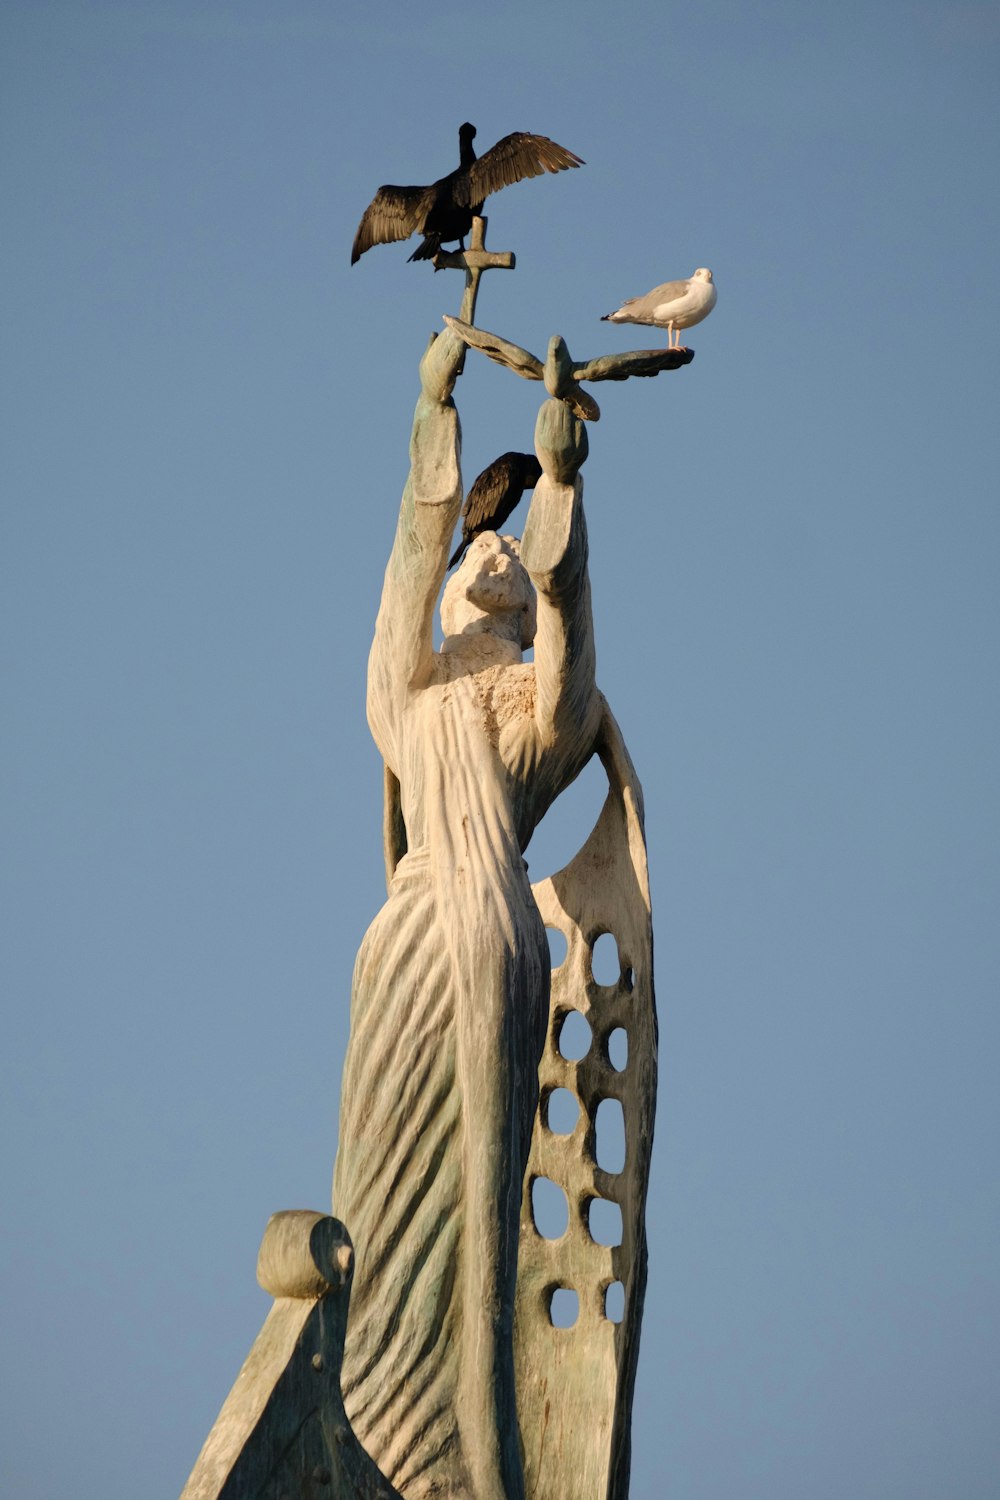 a statue of a woman holding a bird on her arm